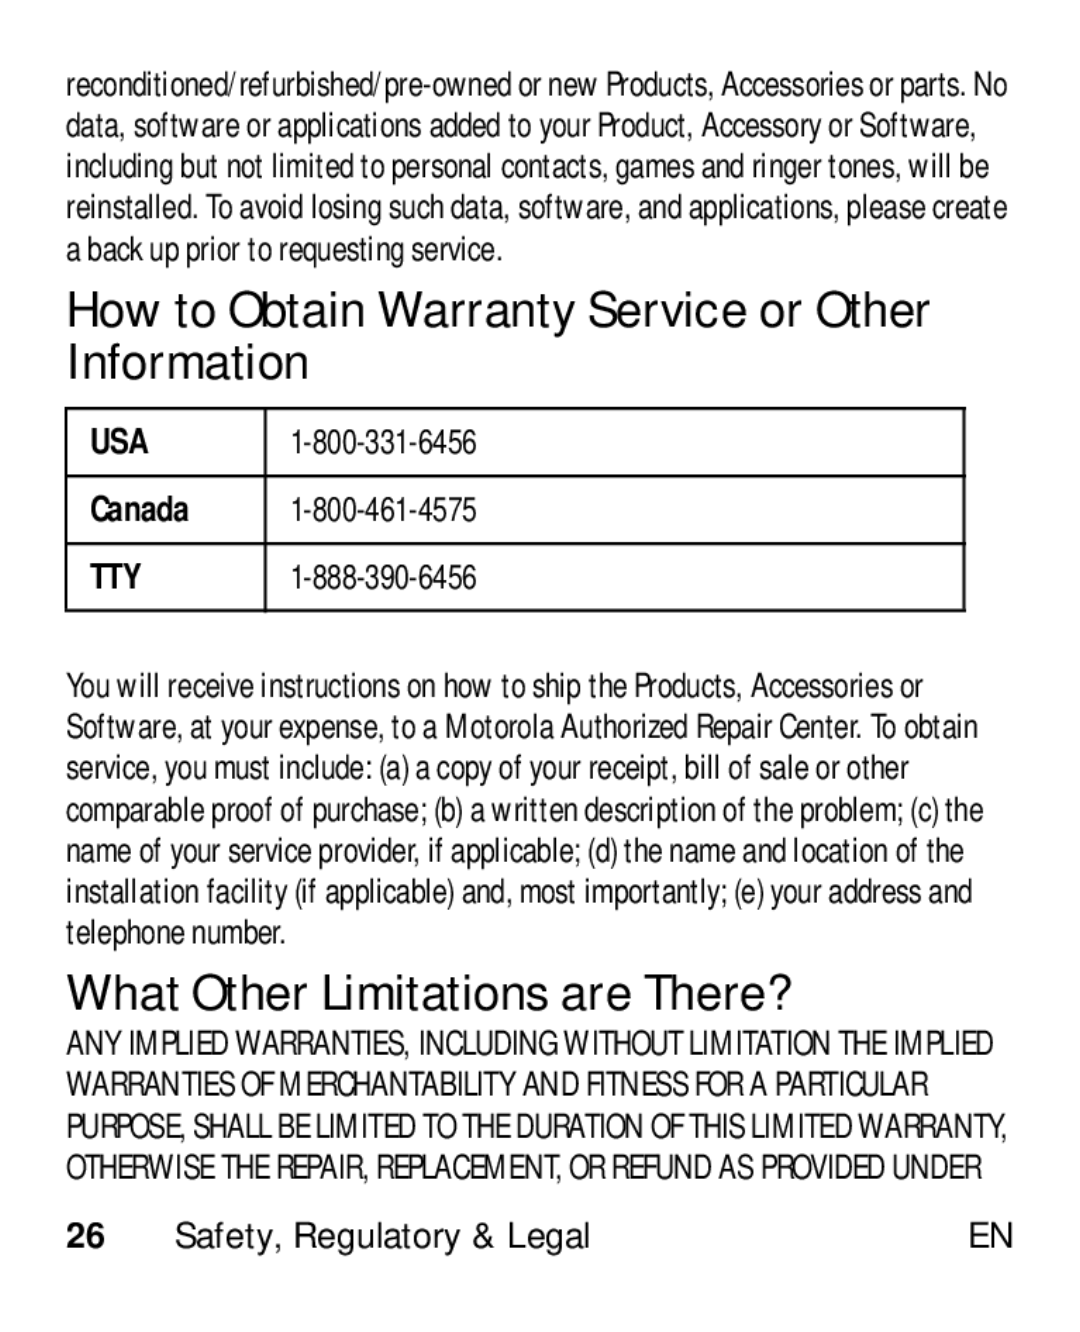 Motorola HK110 manual How to Obtain Warranty Service or Other Information, What Other Limitations are There?, Canada 